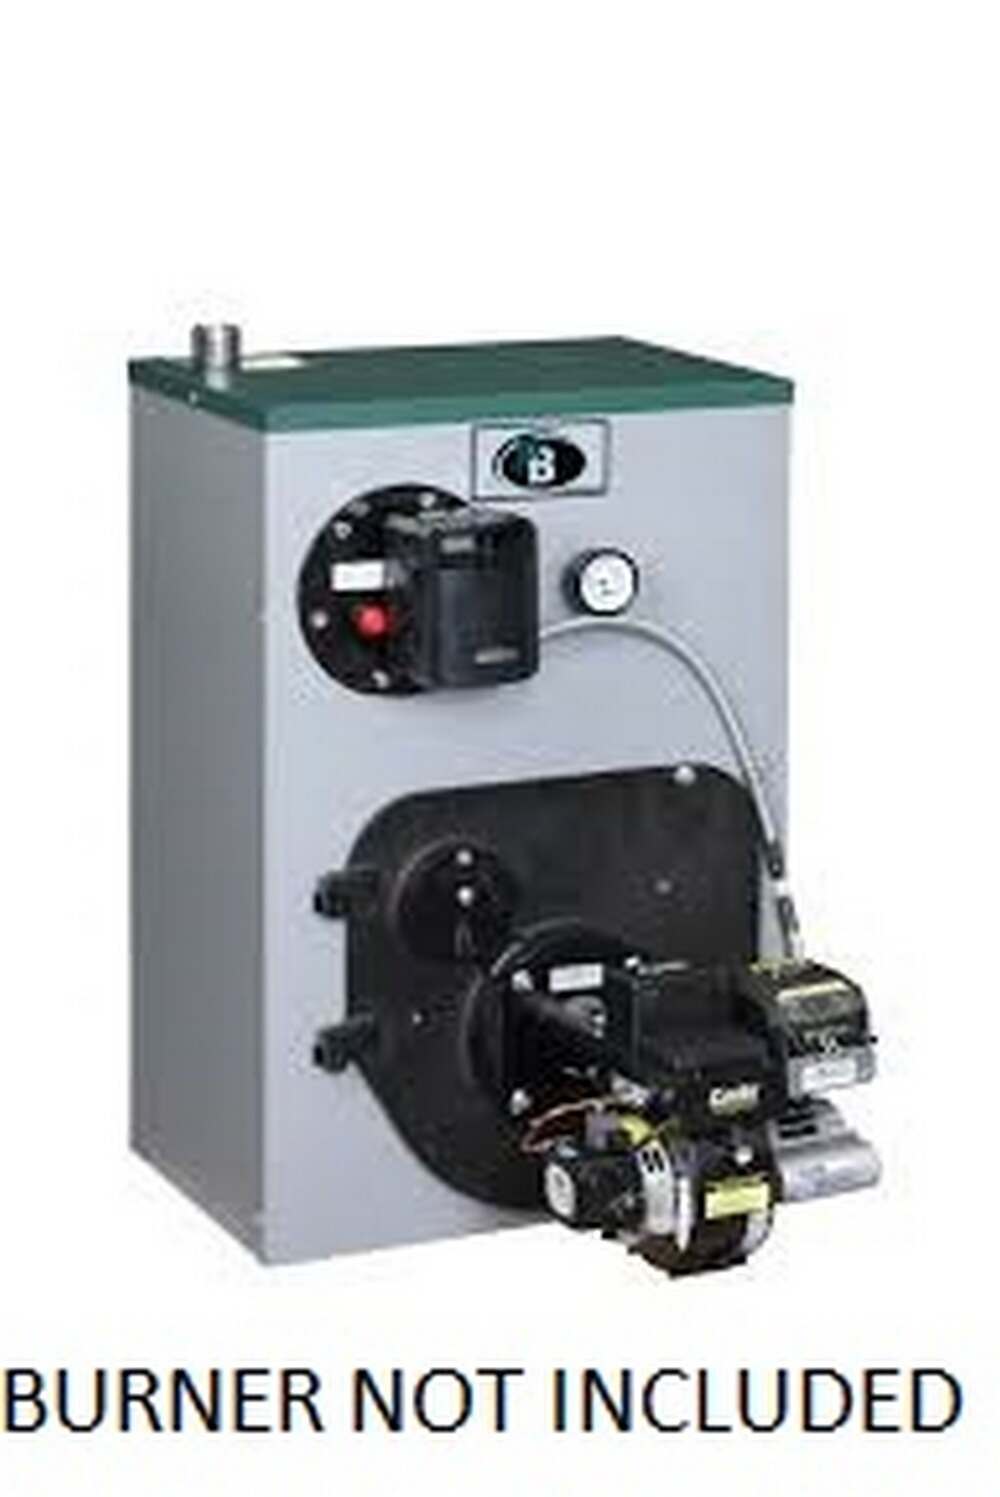 Turbonics Hydronic Fan Coil With Built-In Circulator.